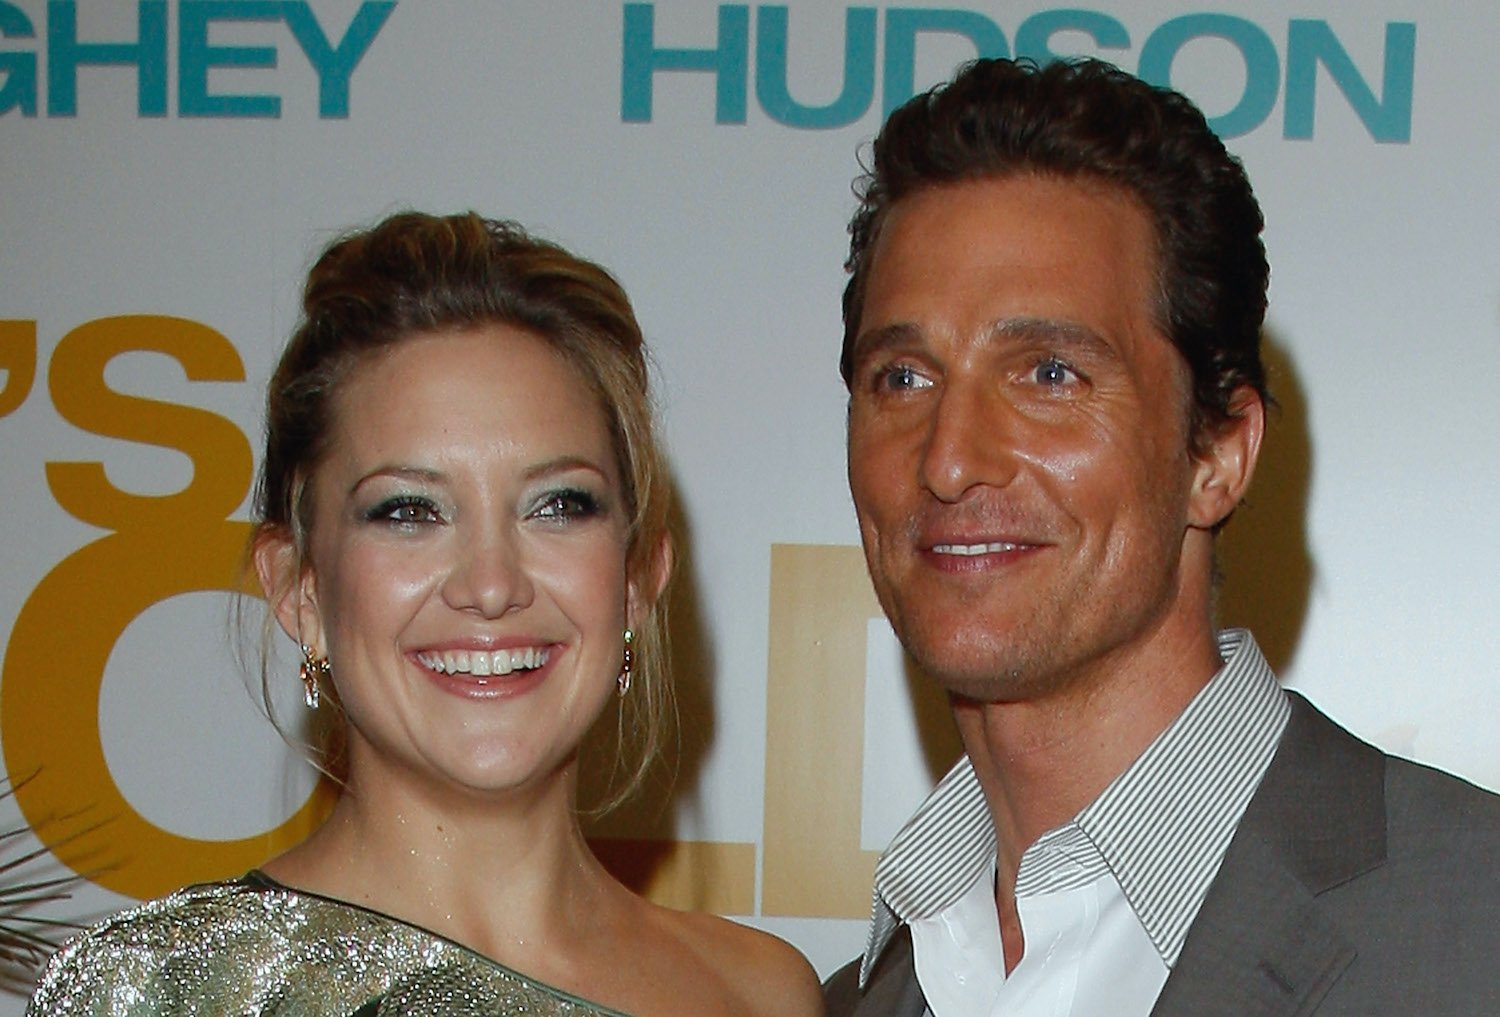 Kate Hudson and Matthew McConaughey attend the Fool's Gold premiere